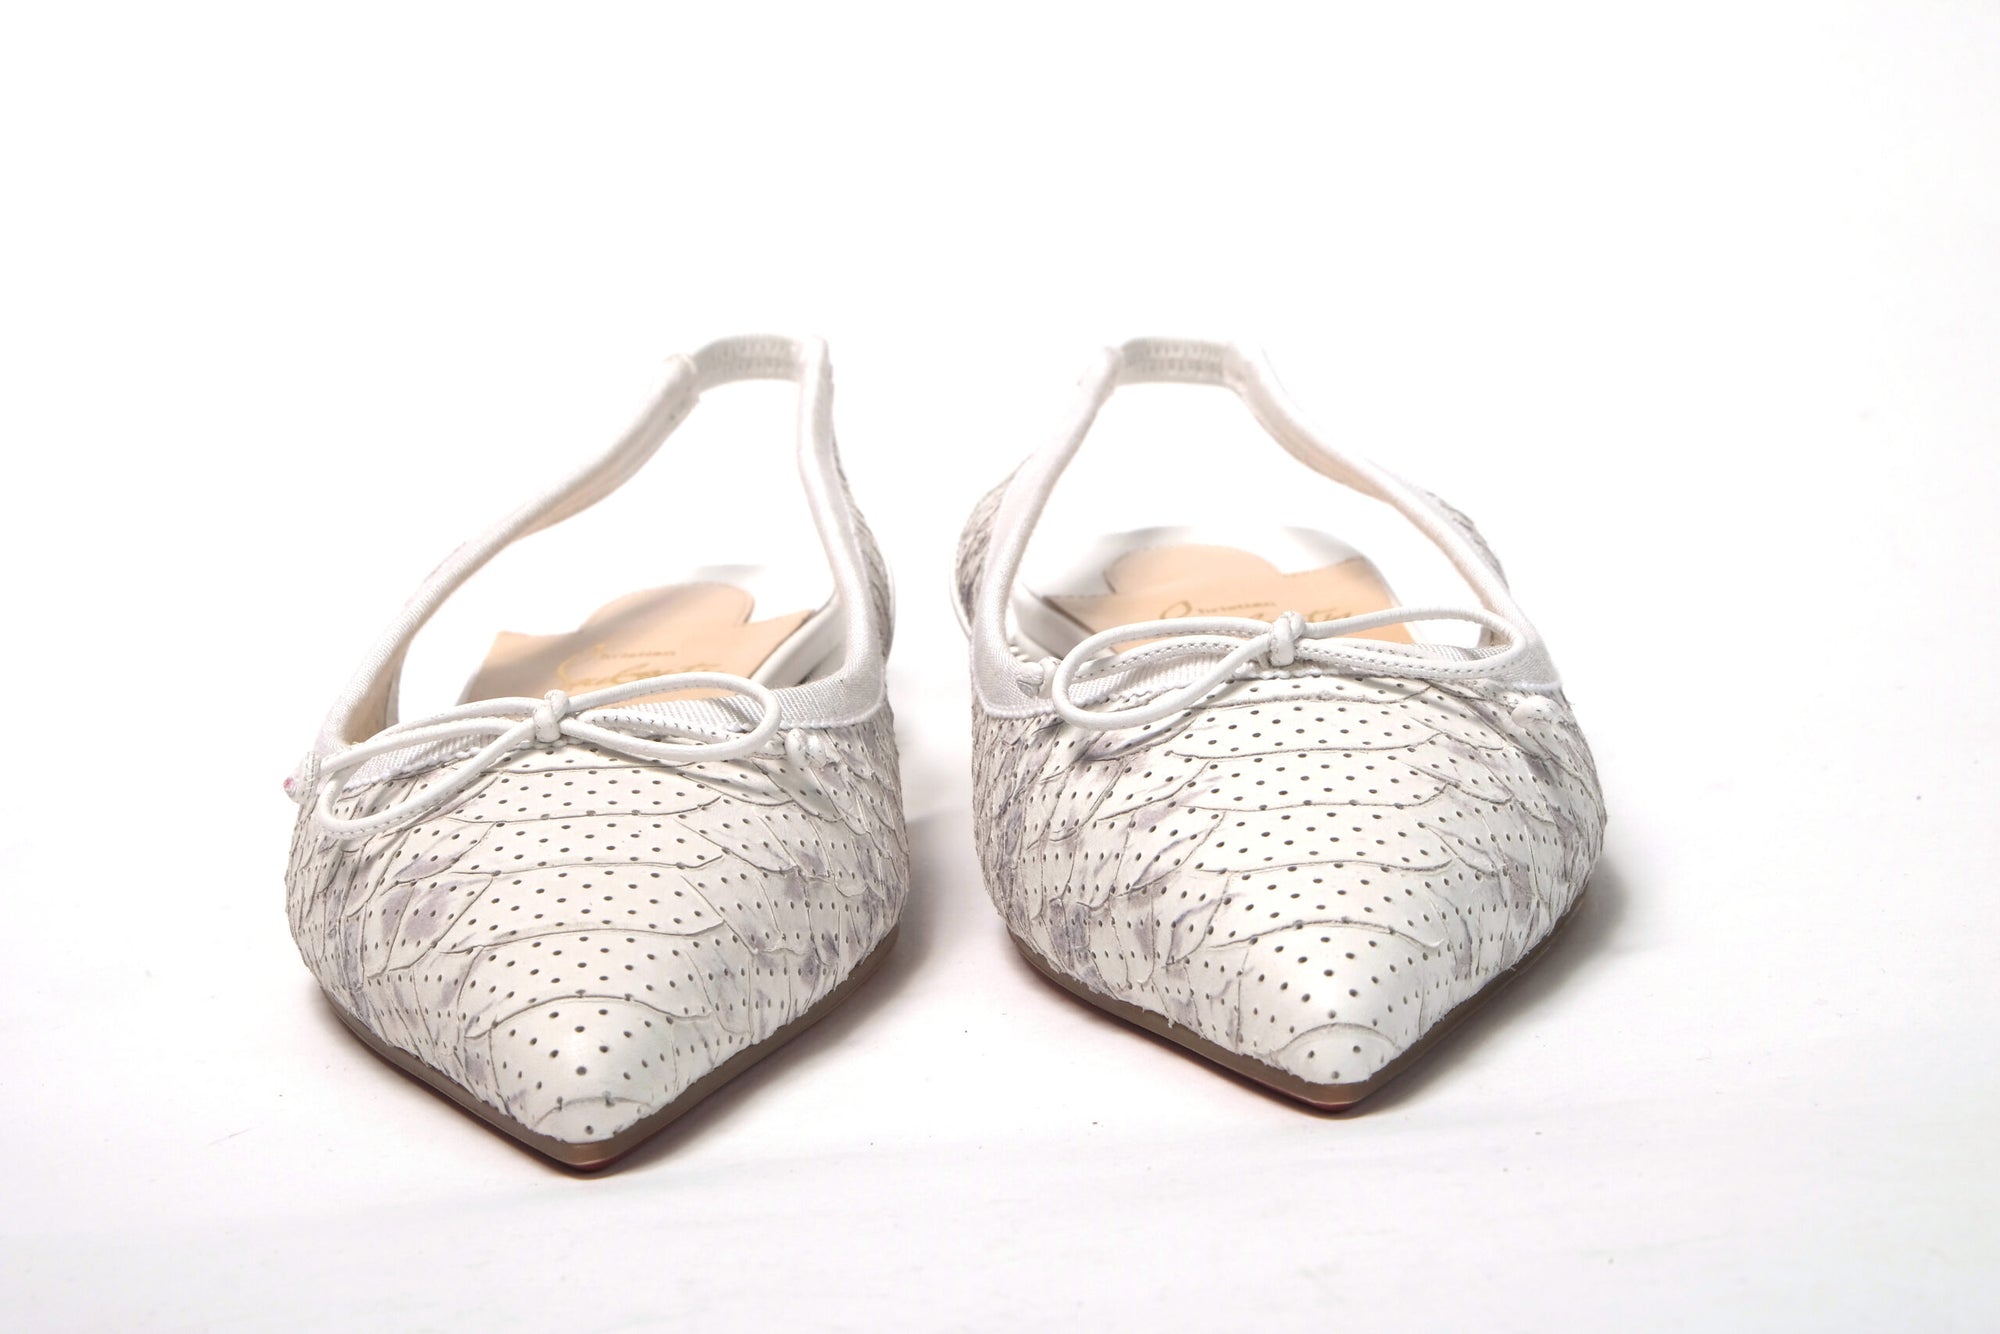 White Perforated Printed Flat Point Toe Shoe